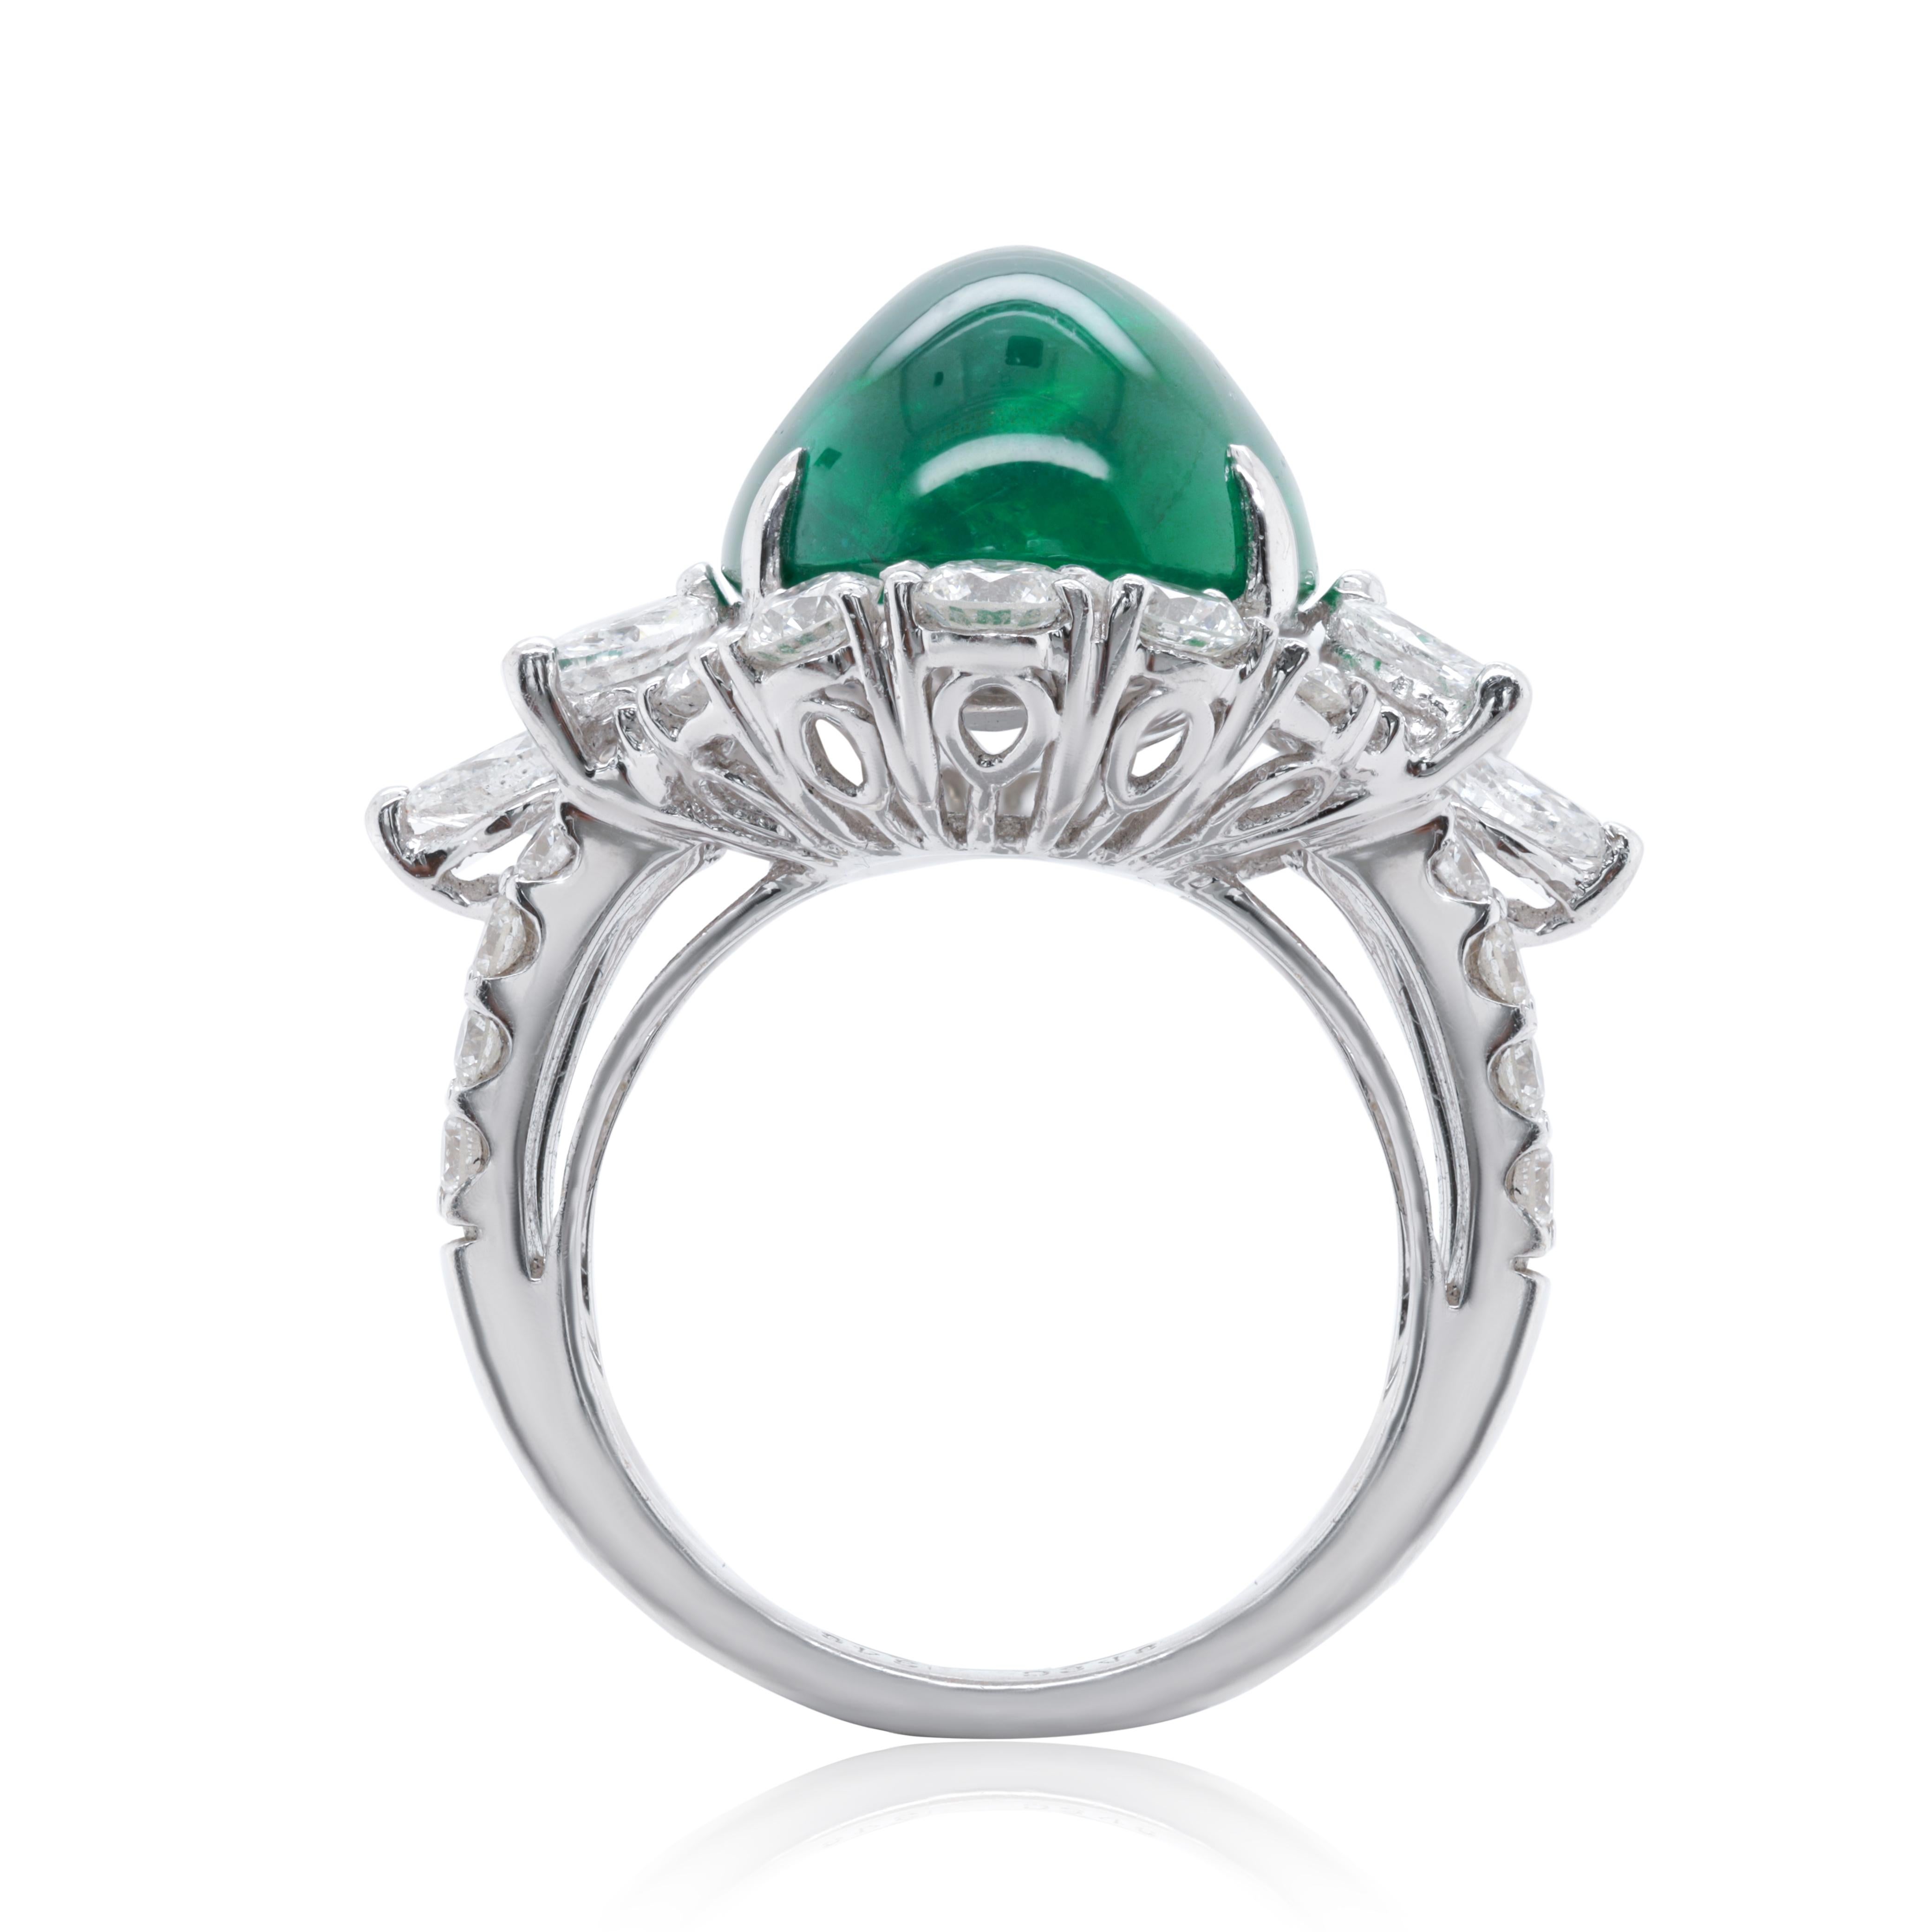 18kt White Gold, Emerald And Diamond Ring, Features 13.39 Carat Gia Certified Emerald With 3.46 Carats Of Diamonds. 
Diana M. is a leading supplier of top-quality fine jewelry for over 35 years.
Diana M is one-stop shop for all your jewelry